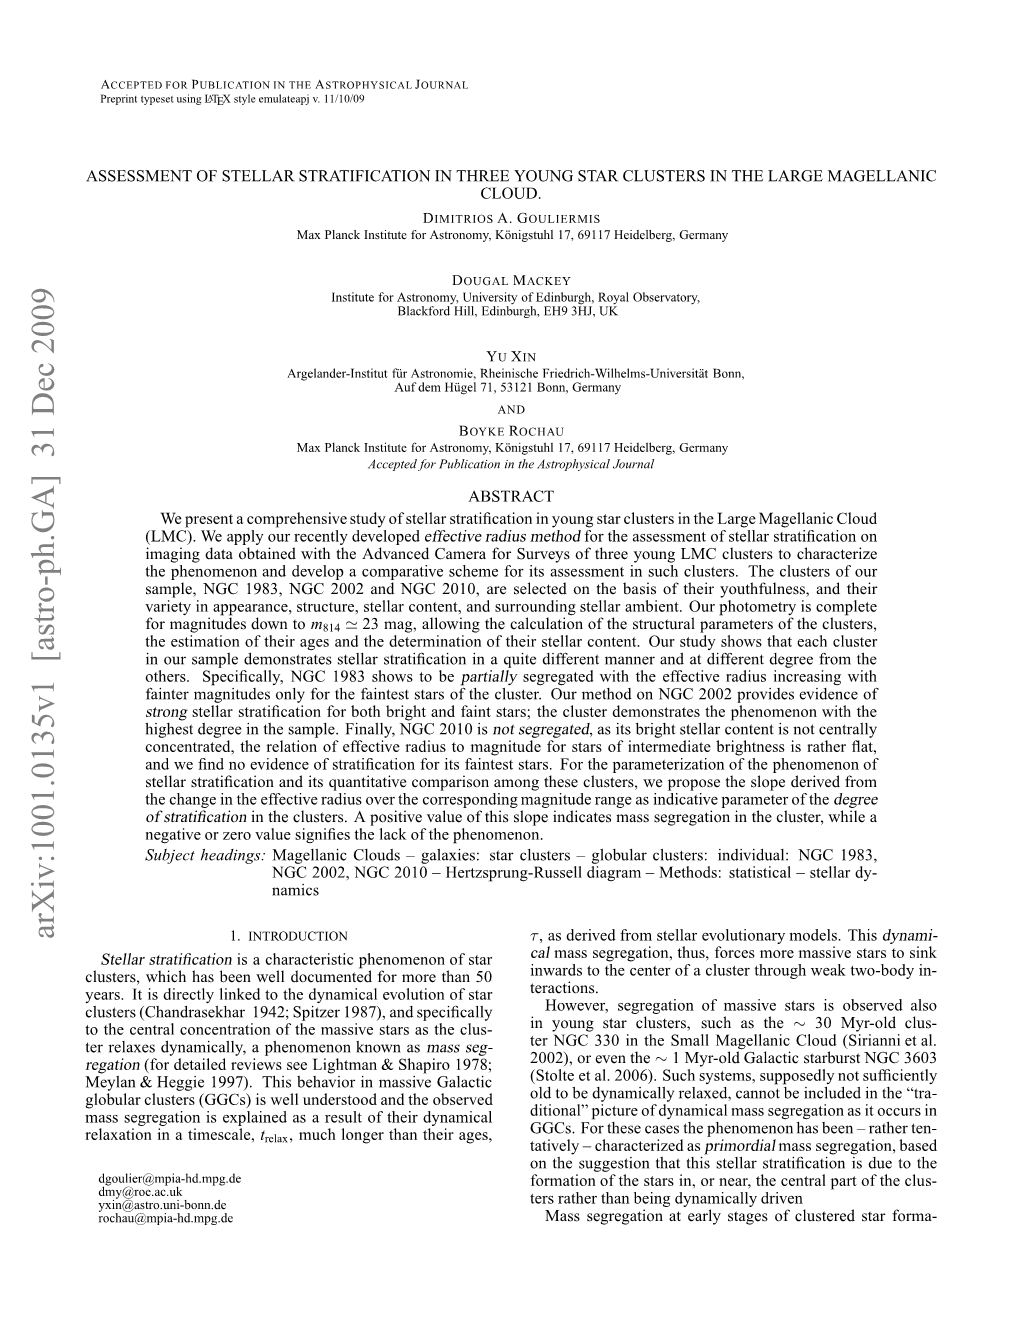 Assessment of Stellar Stratification in Three Young Star Clusters in The